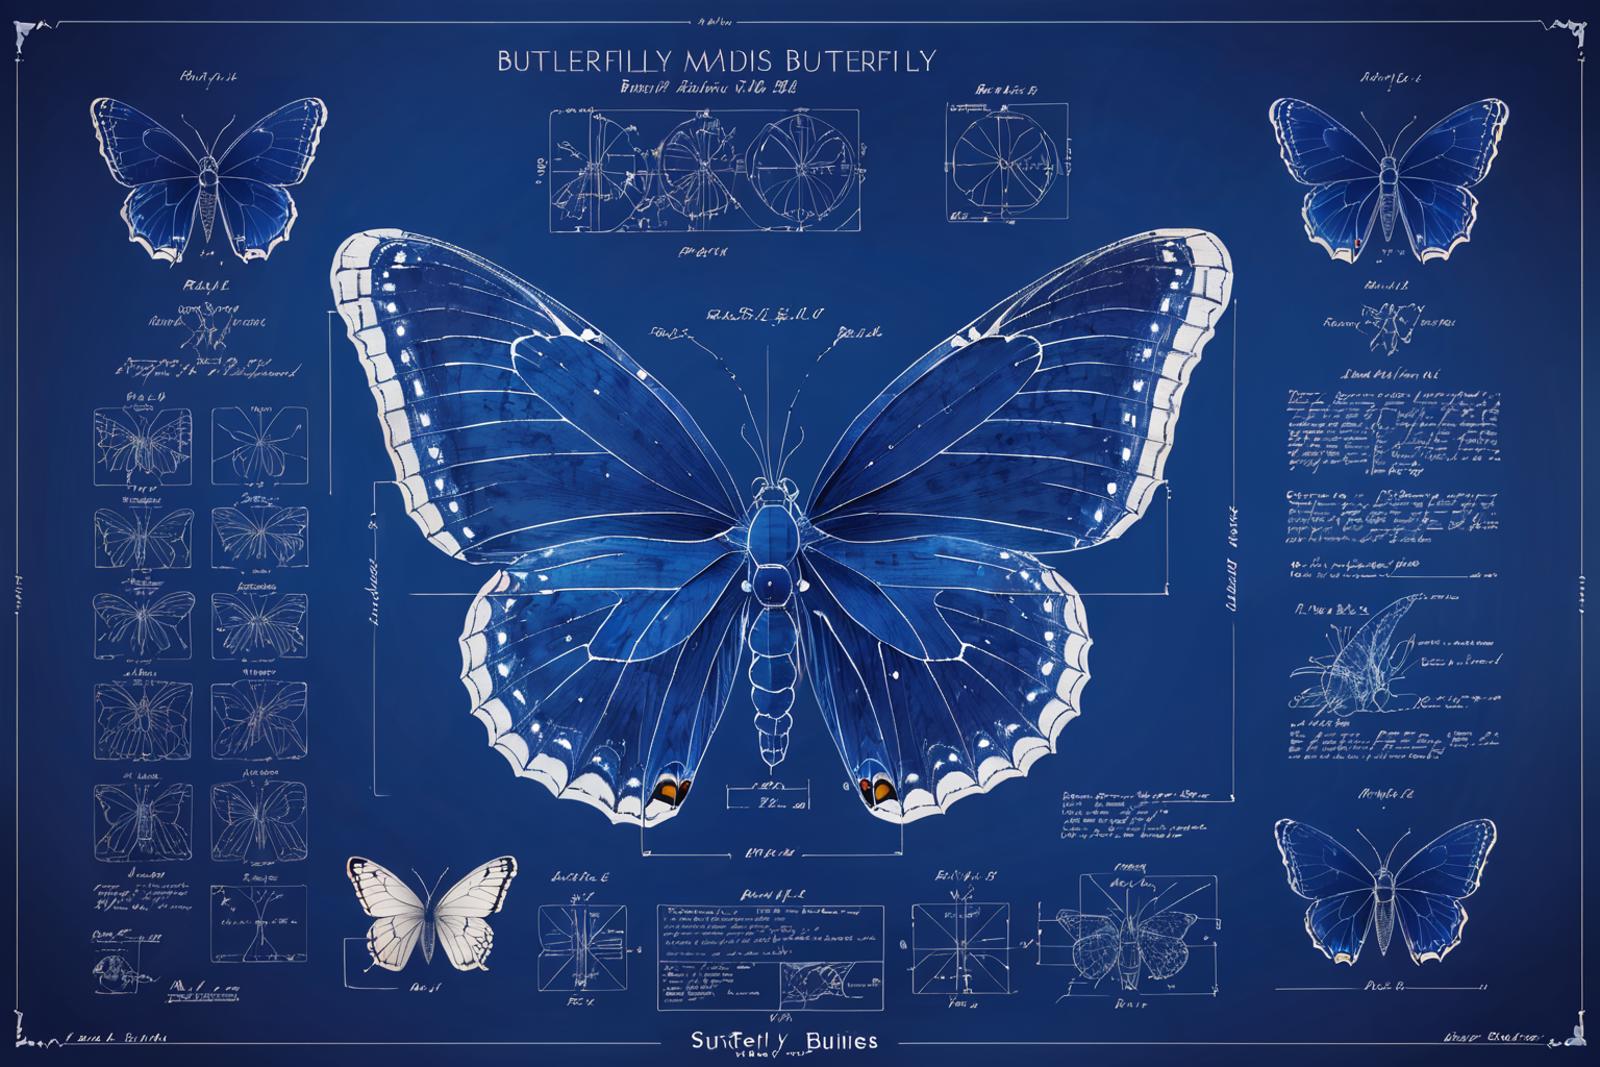 Blue butterfly with white wings and intricate details on blue background, with a butterfly diagram underneath.